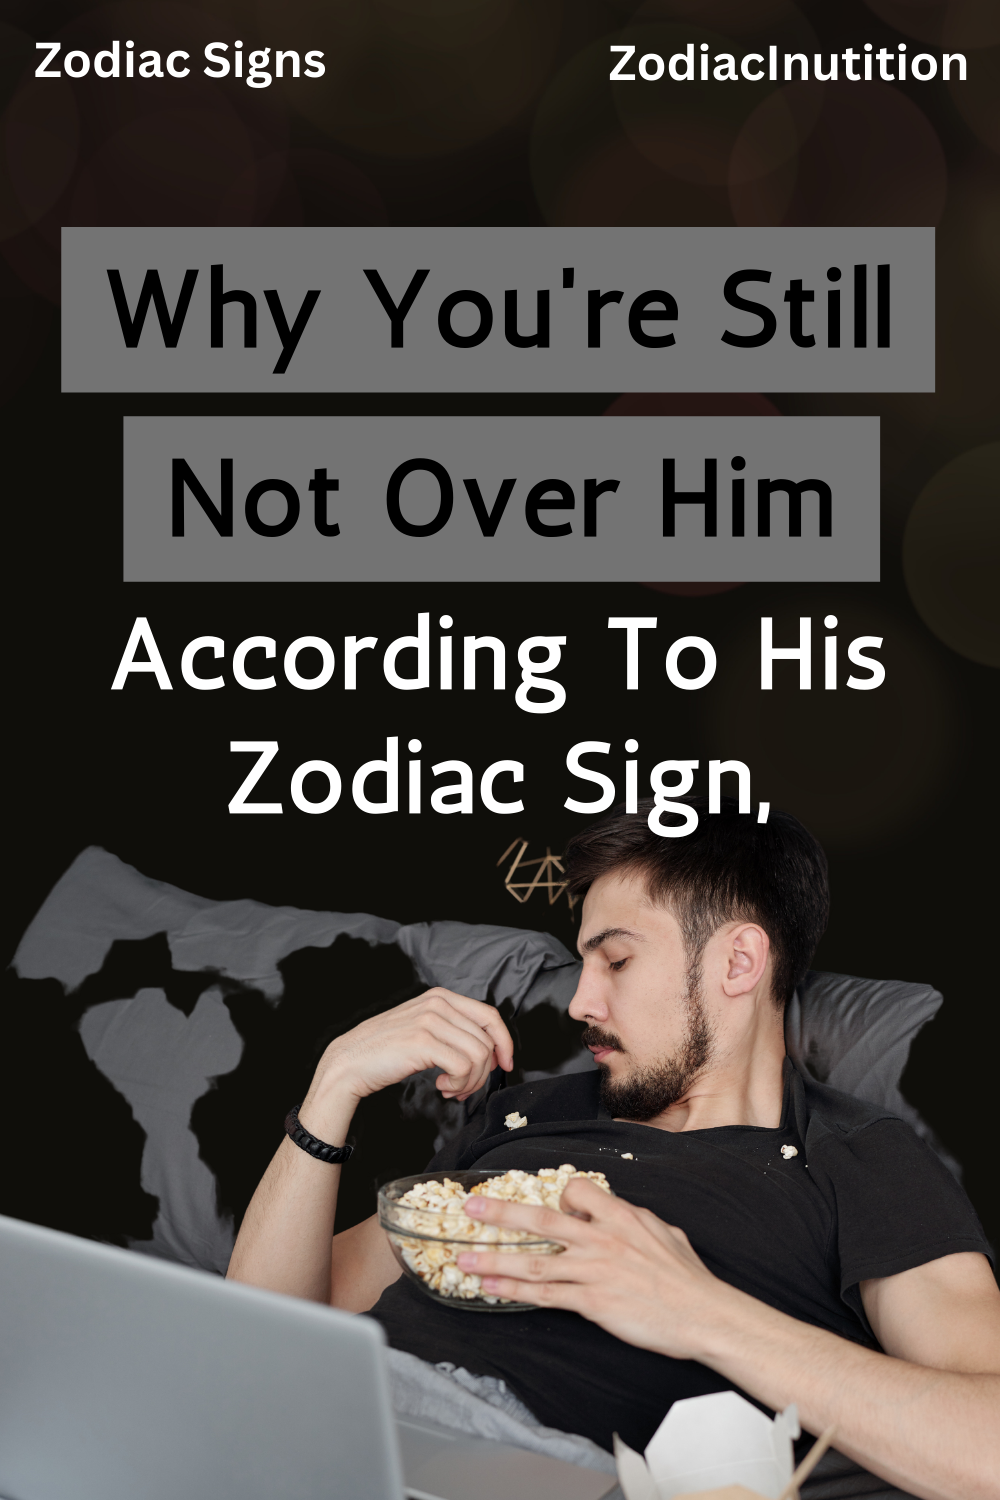 Why You're Still Not Over Him According To Your Sign